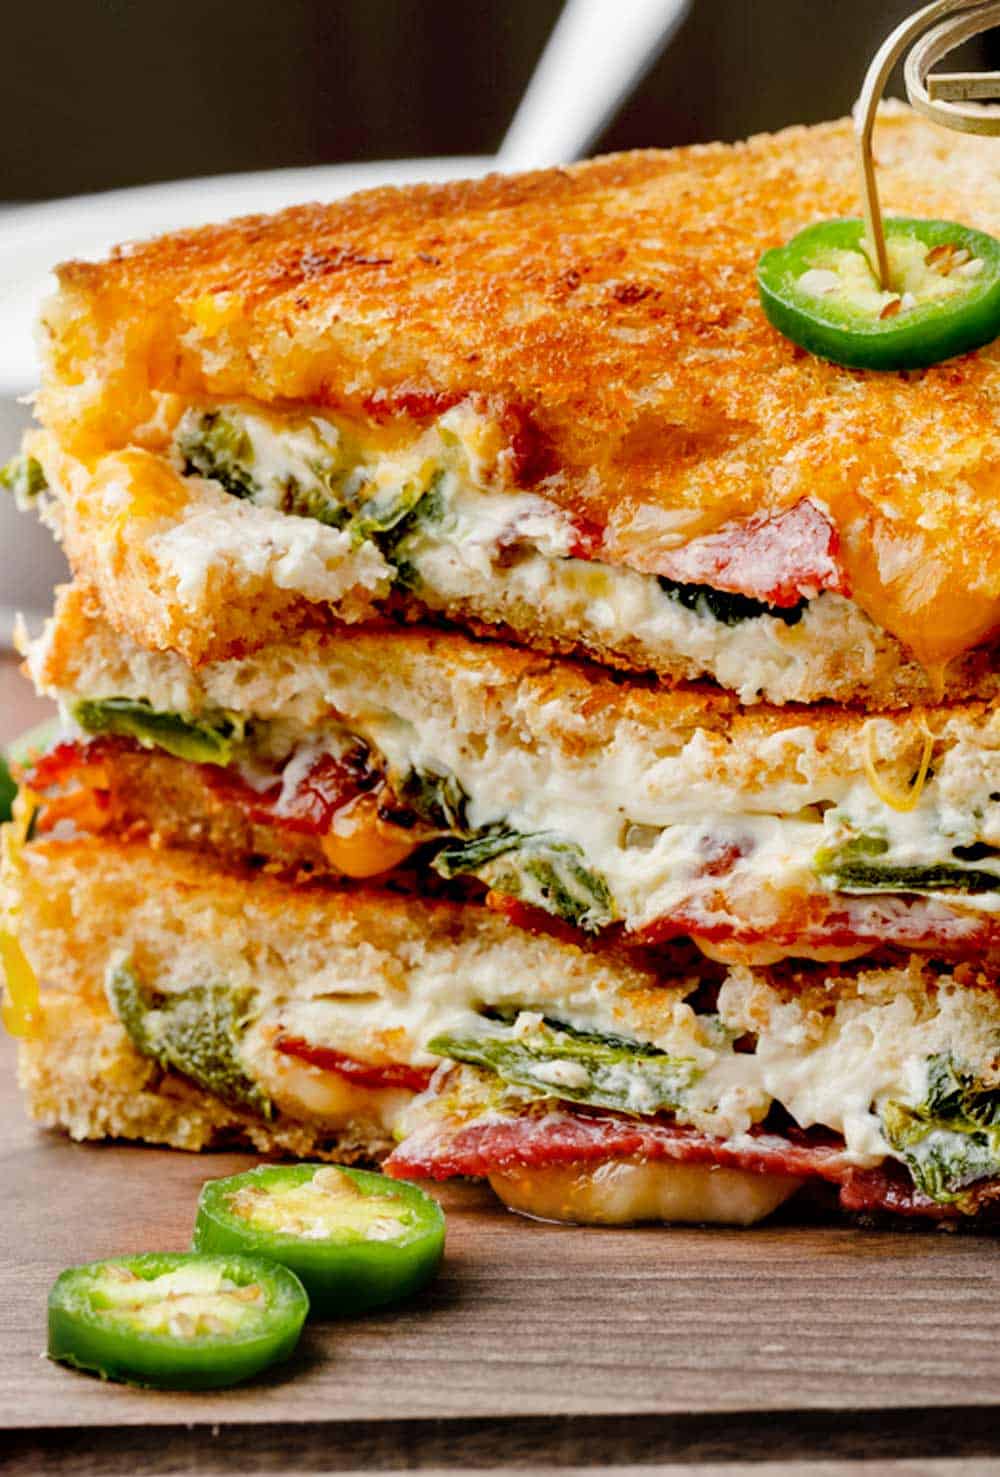 Image of a jalapeno popper grilled cheese sandwich cut diagonally and placed on a wooden serving board. The sandwich reveals melted cheese, bacon and roasted jalapeno pieces inside.